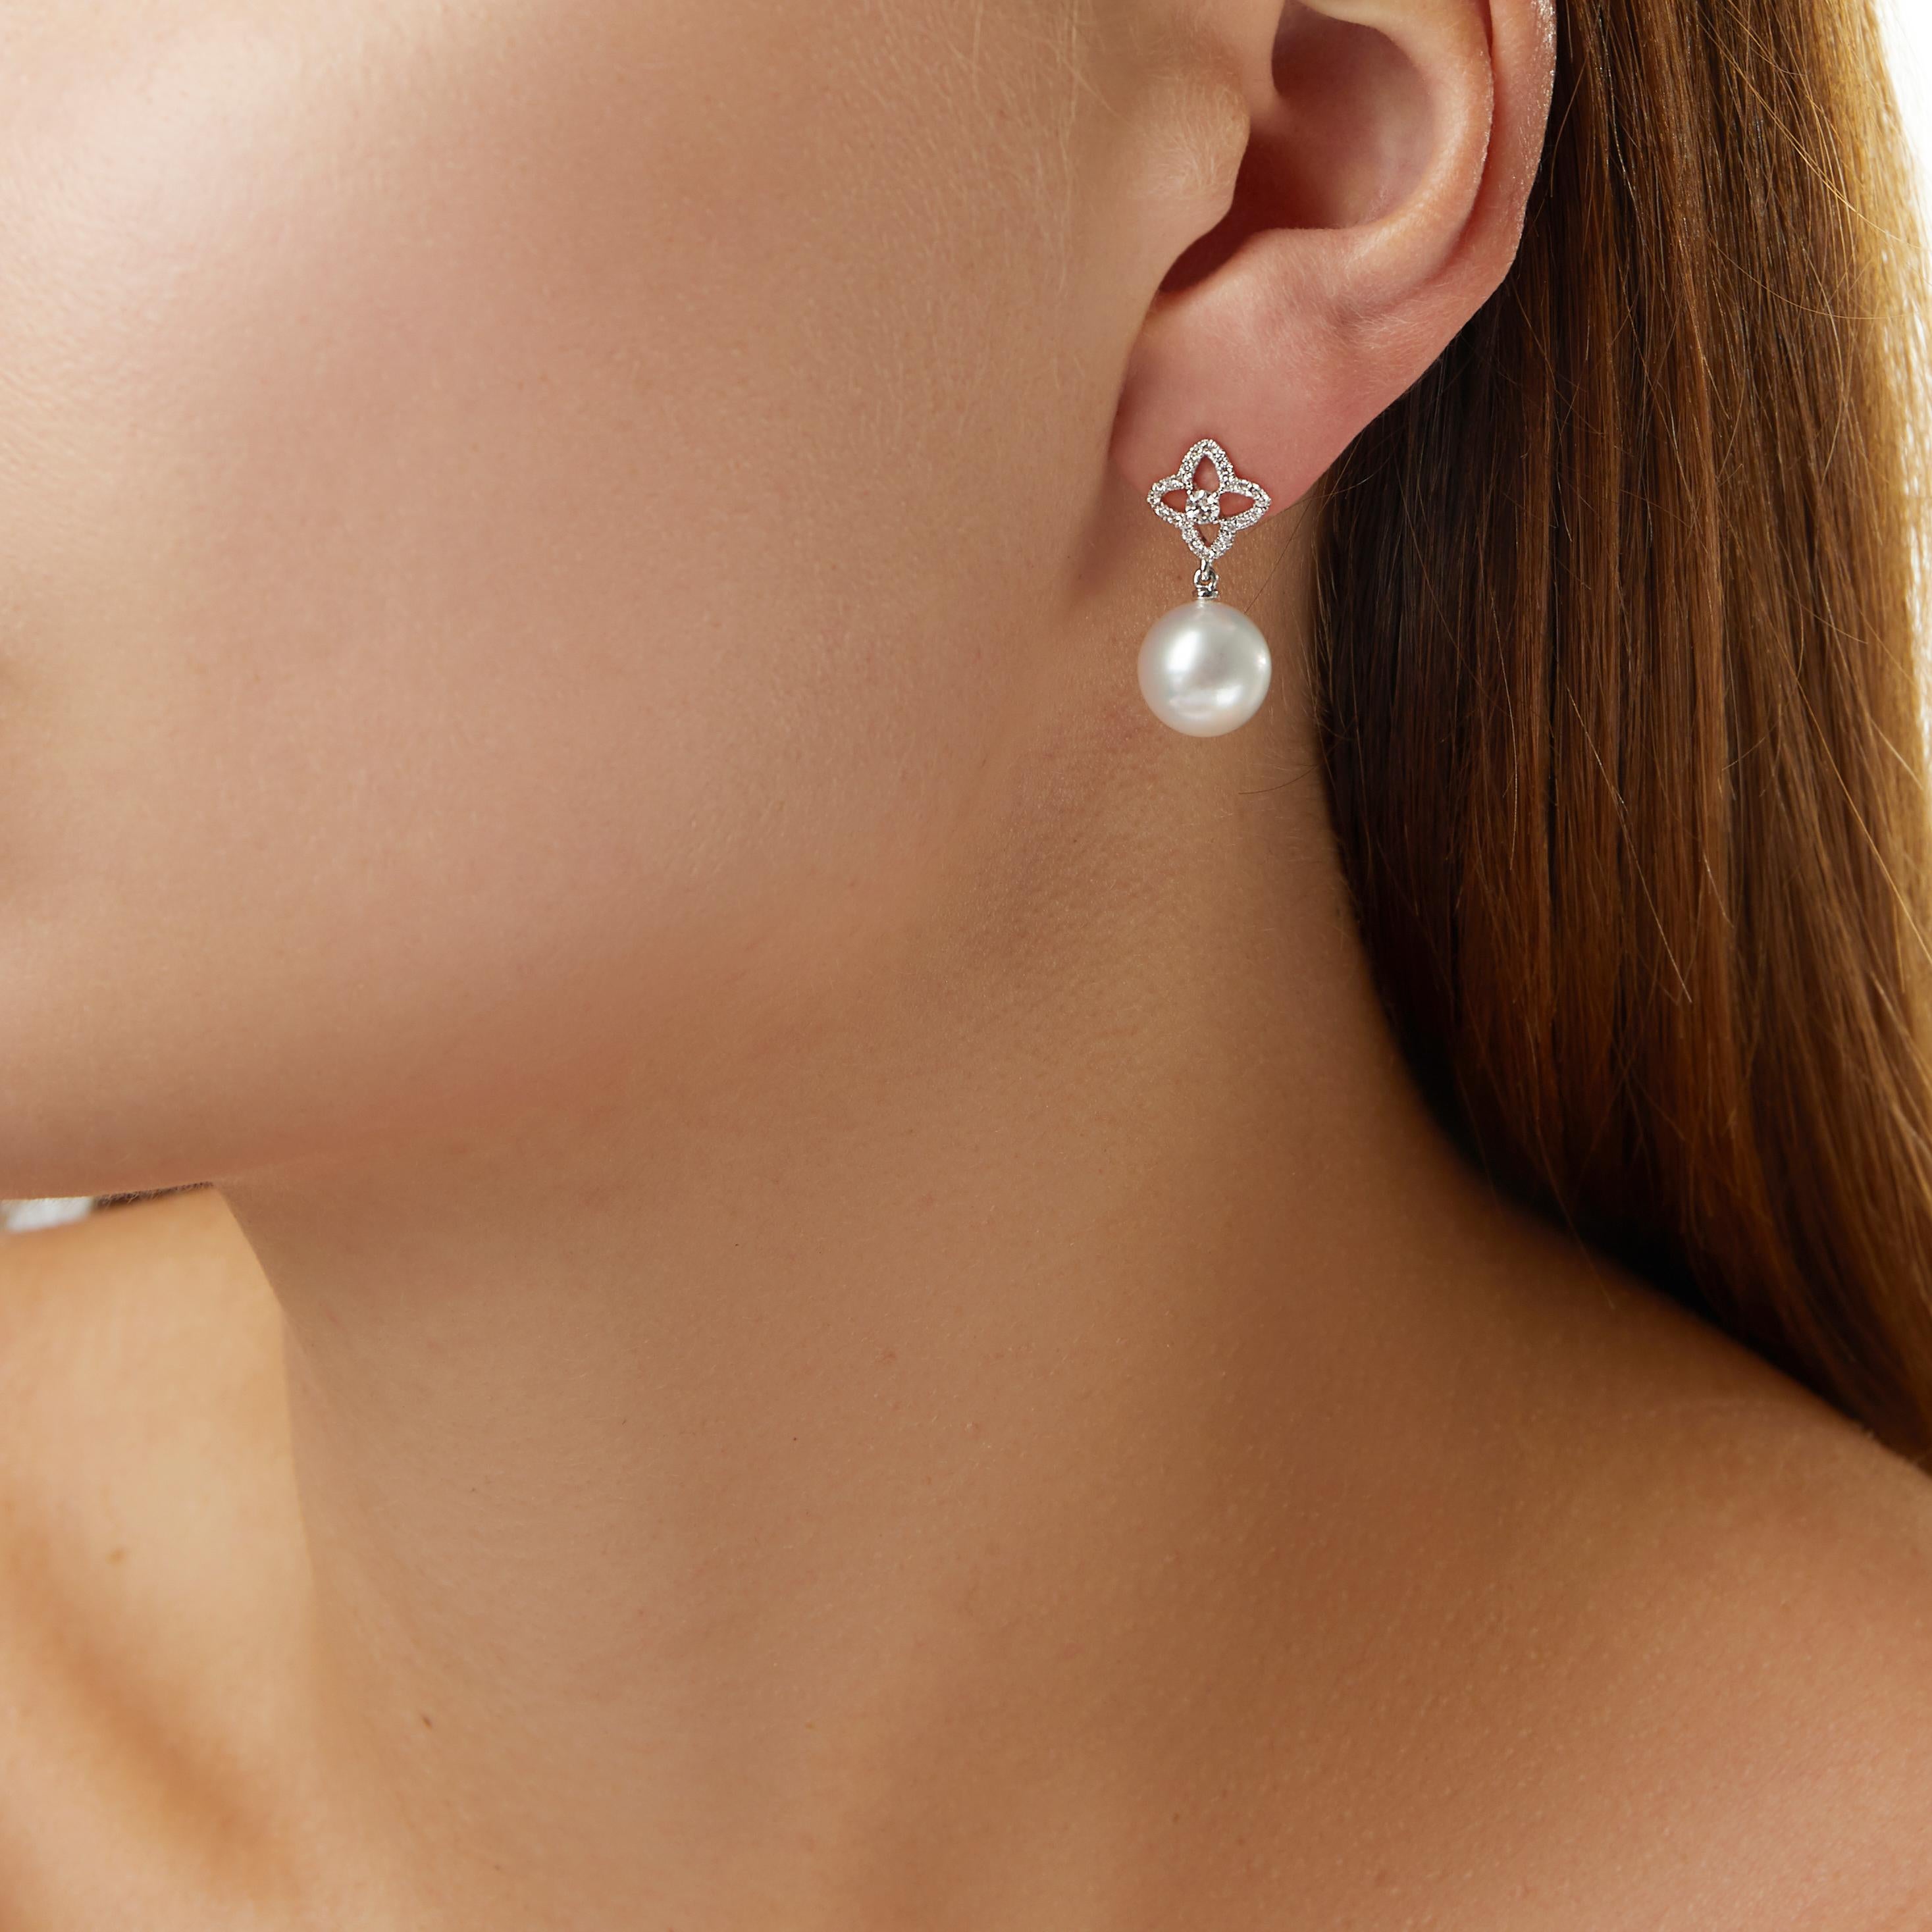 These Yoko London earrings are the perfect day to night piece. The delicate floral design will bring a touch of glamour to any look. Featuring lustrous South Sea pearls, these earrings are the perfect addition to any jewellery box.

- 10-11mm